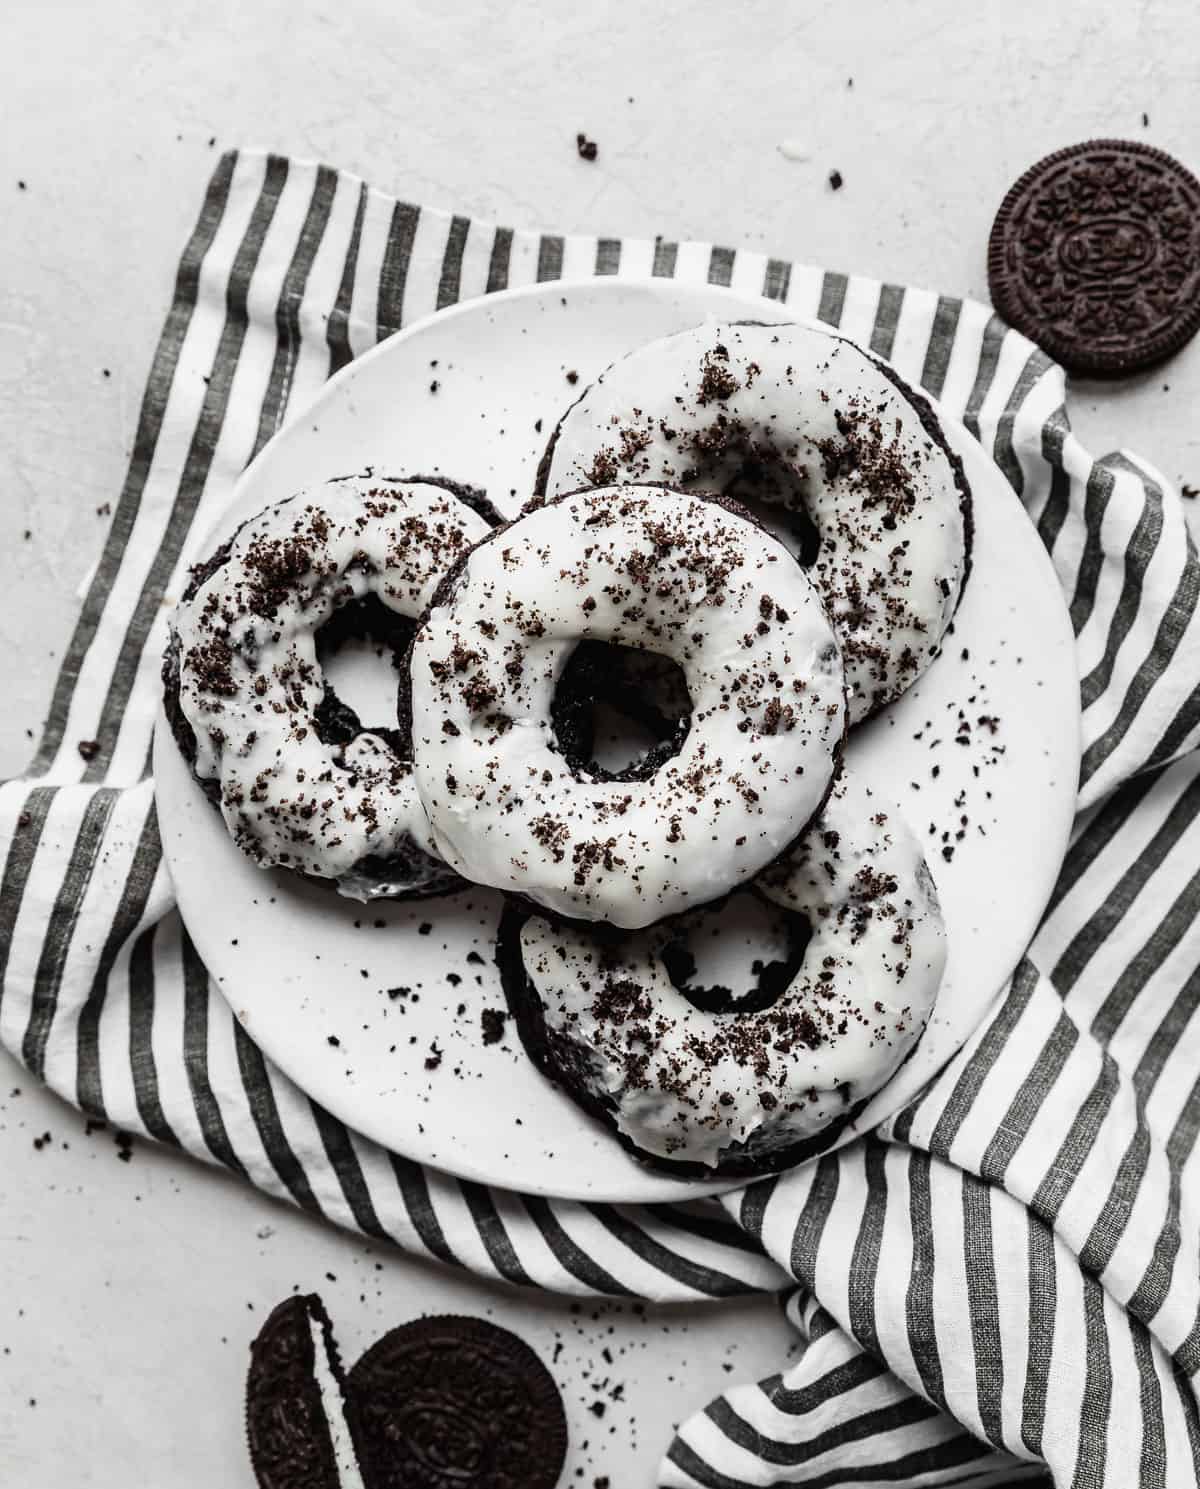 Four oreo donuts on a plate with a striped napkin - Oreo